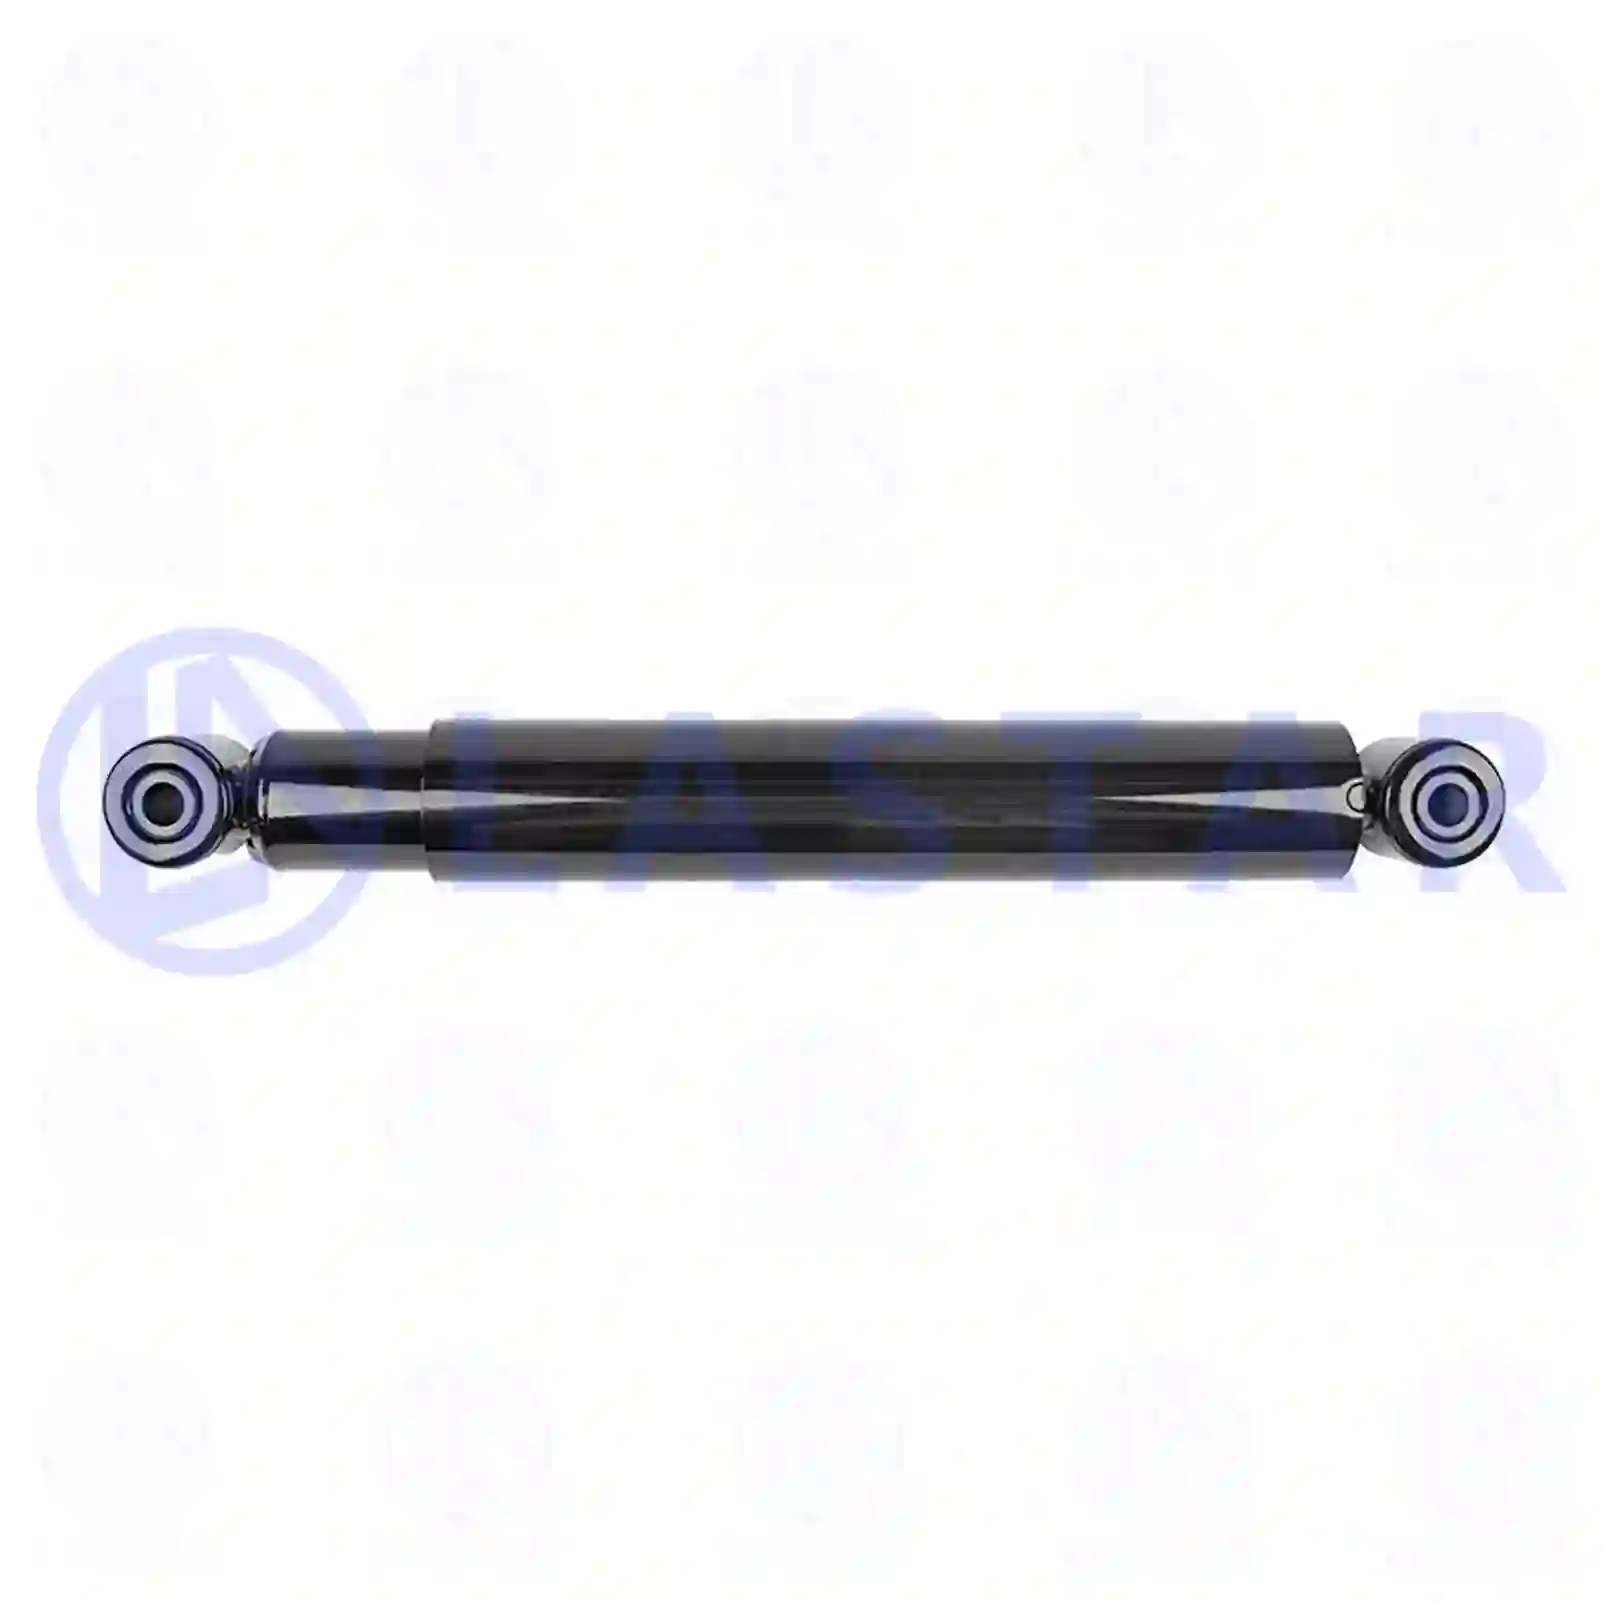 Shock absorber, 77727999, 0043261300, , , , , ||  77727999 Lastar Spare Part | Truck Spare Parts, Auotomotive Spare Parts Shock absorber, 77727999, 0043261300, , , , , ||  77727999 Lastar Spare Part | Truck Spare Parts, Auotomotive Spare Parts